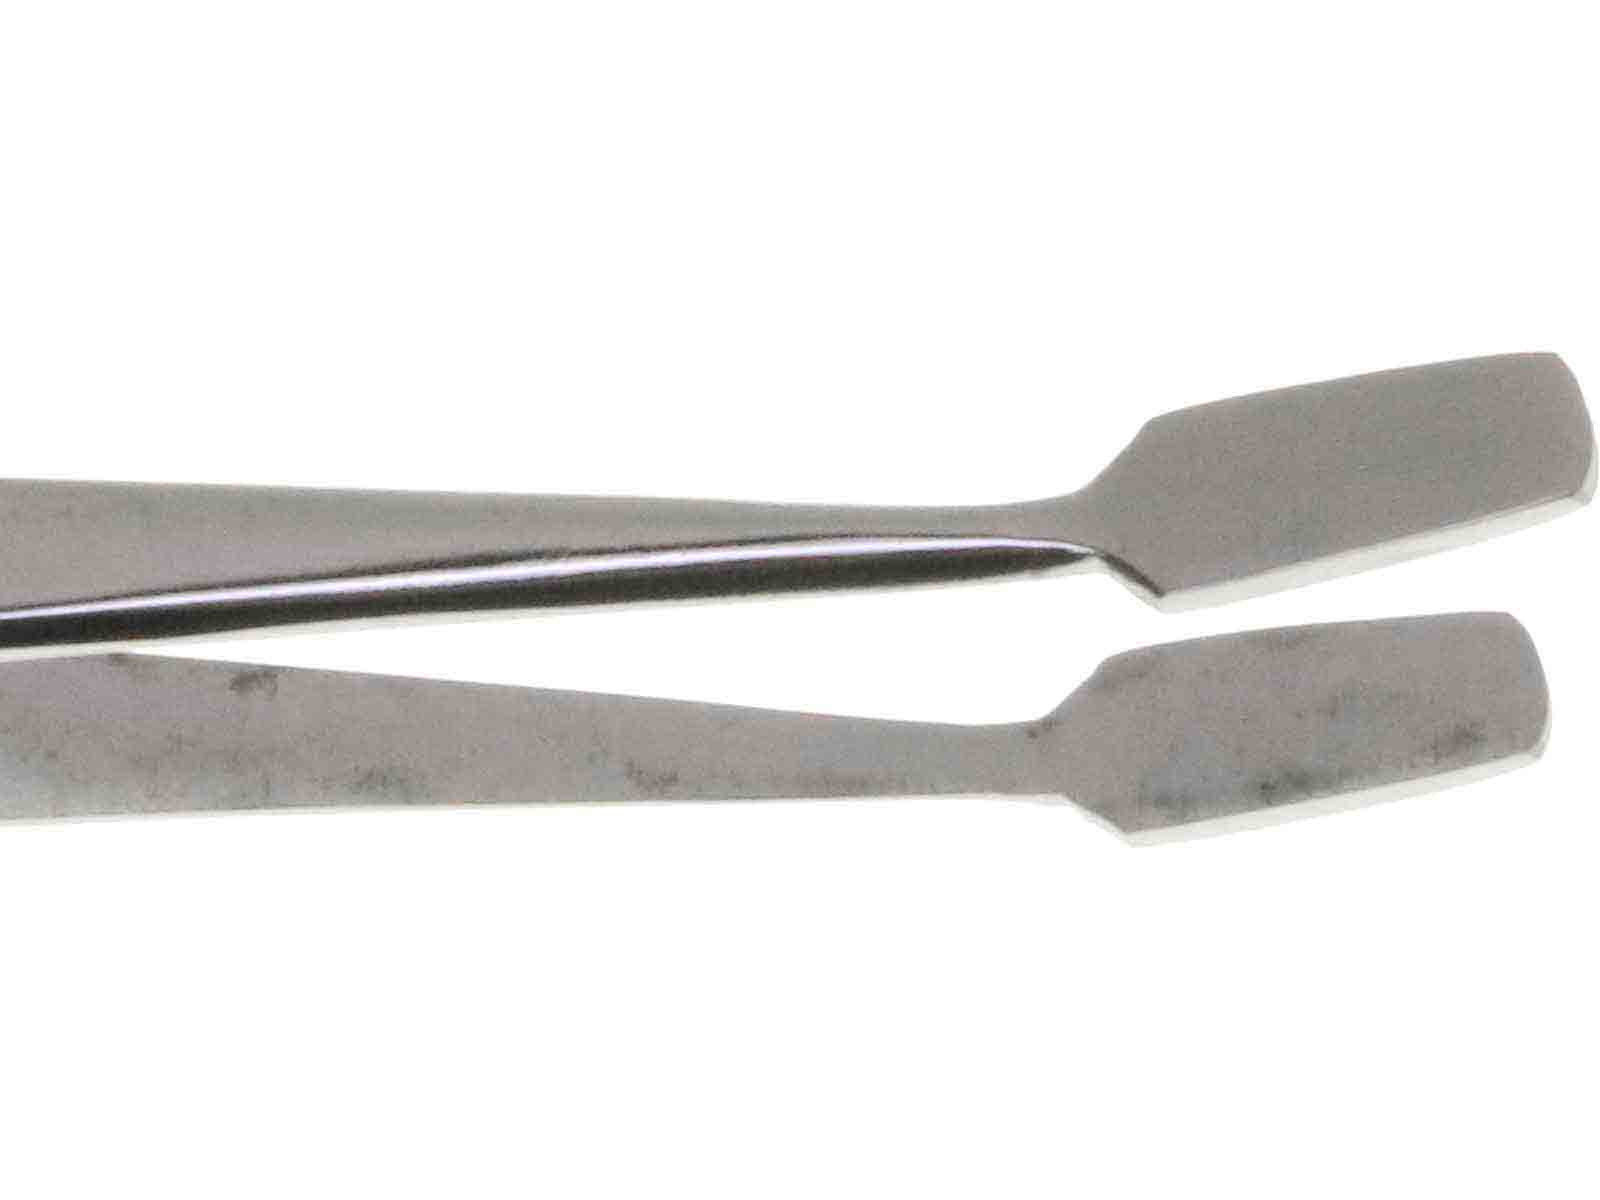 4 3/4 inch Stamp/Paddle Tweezer Curved